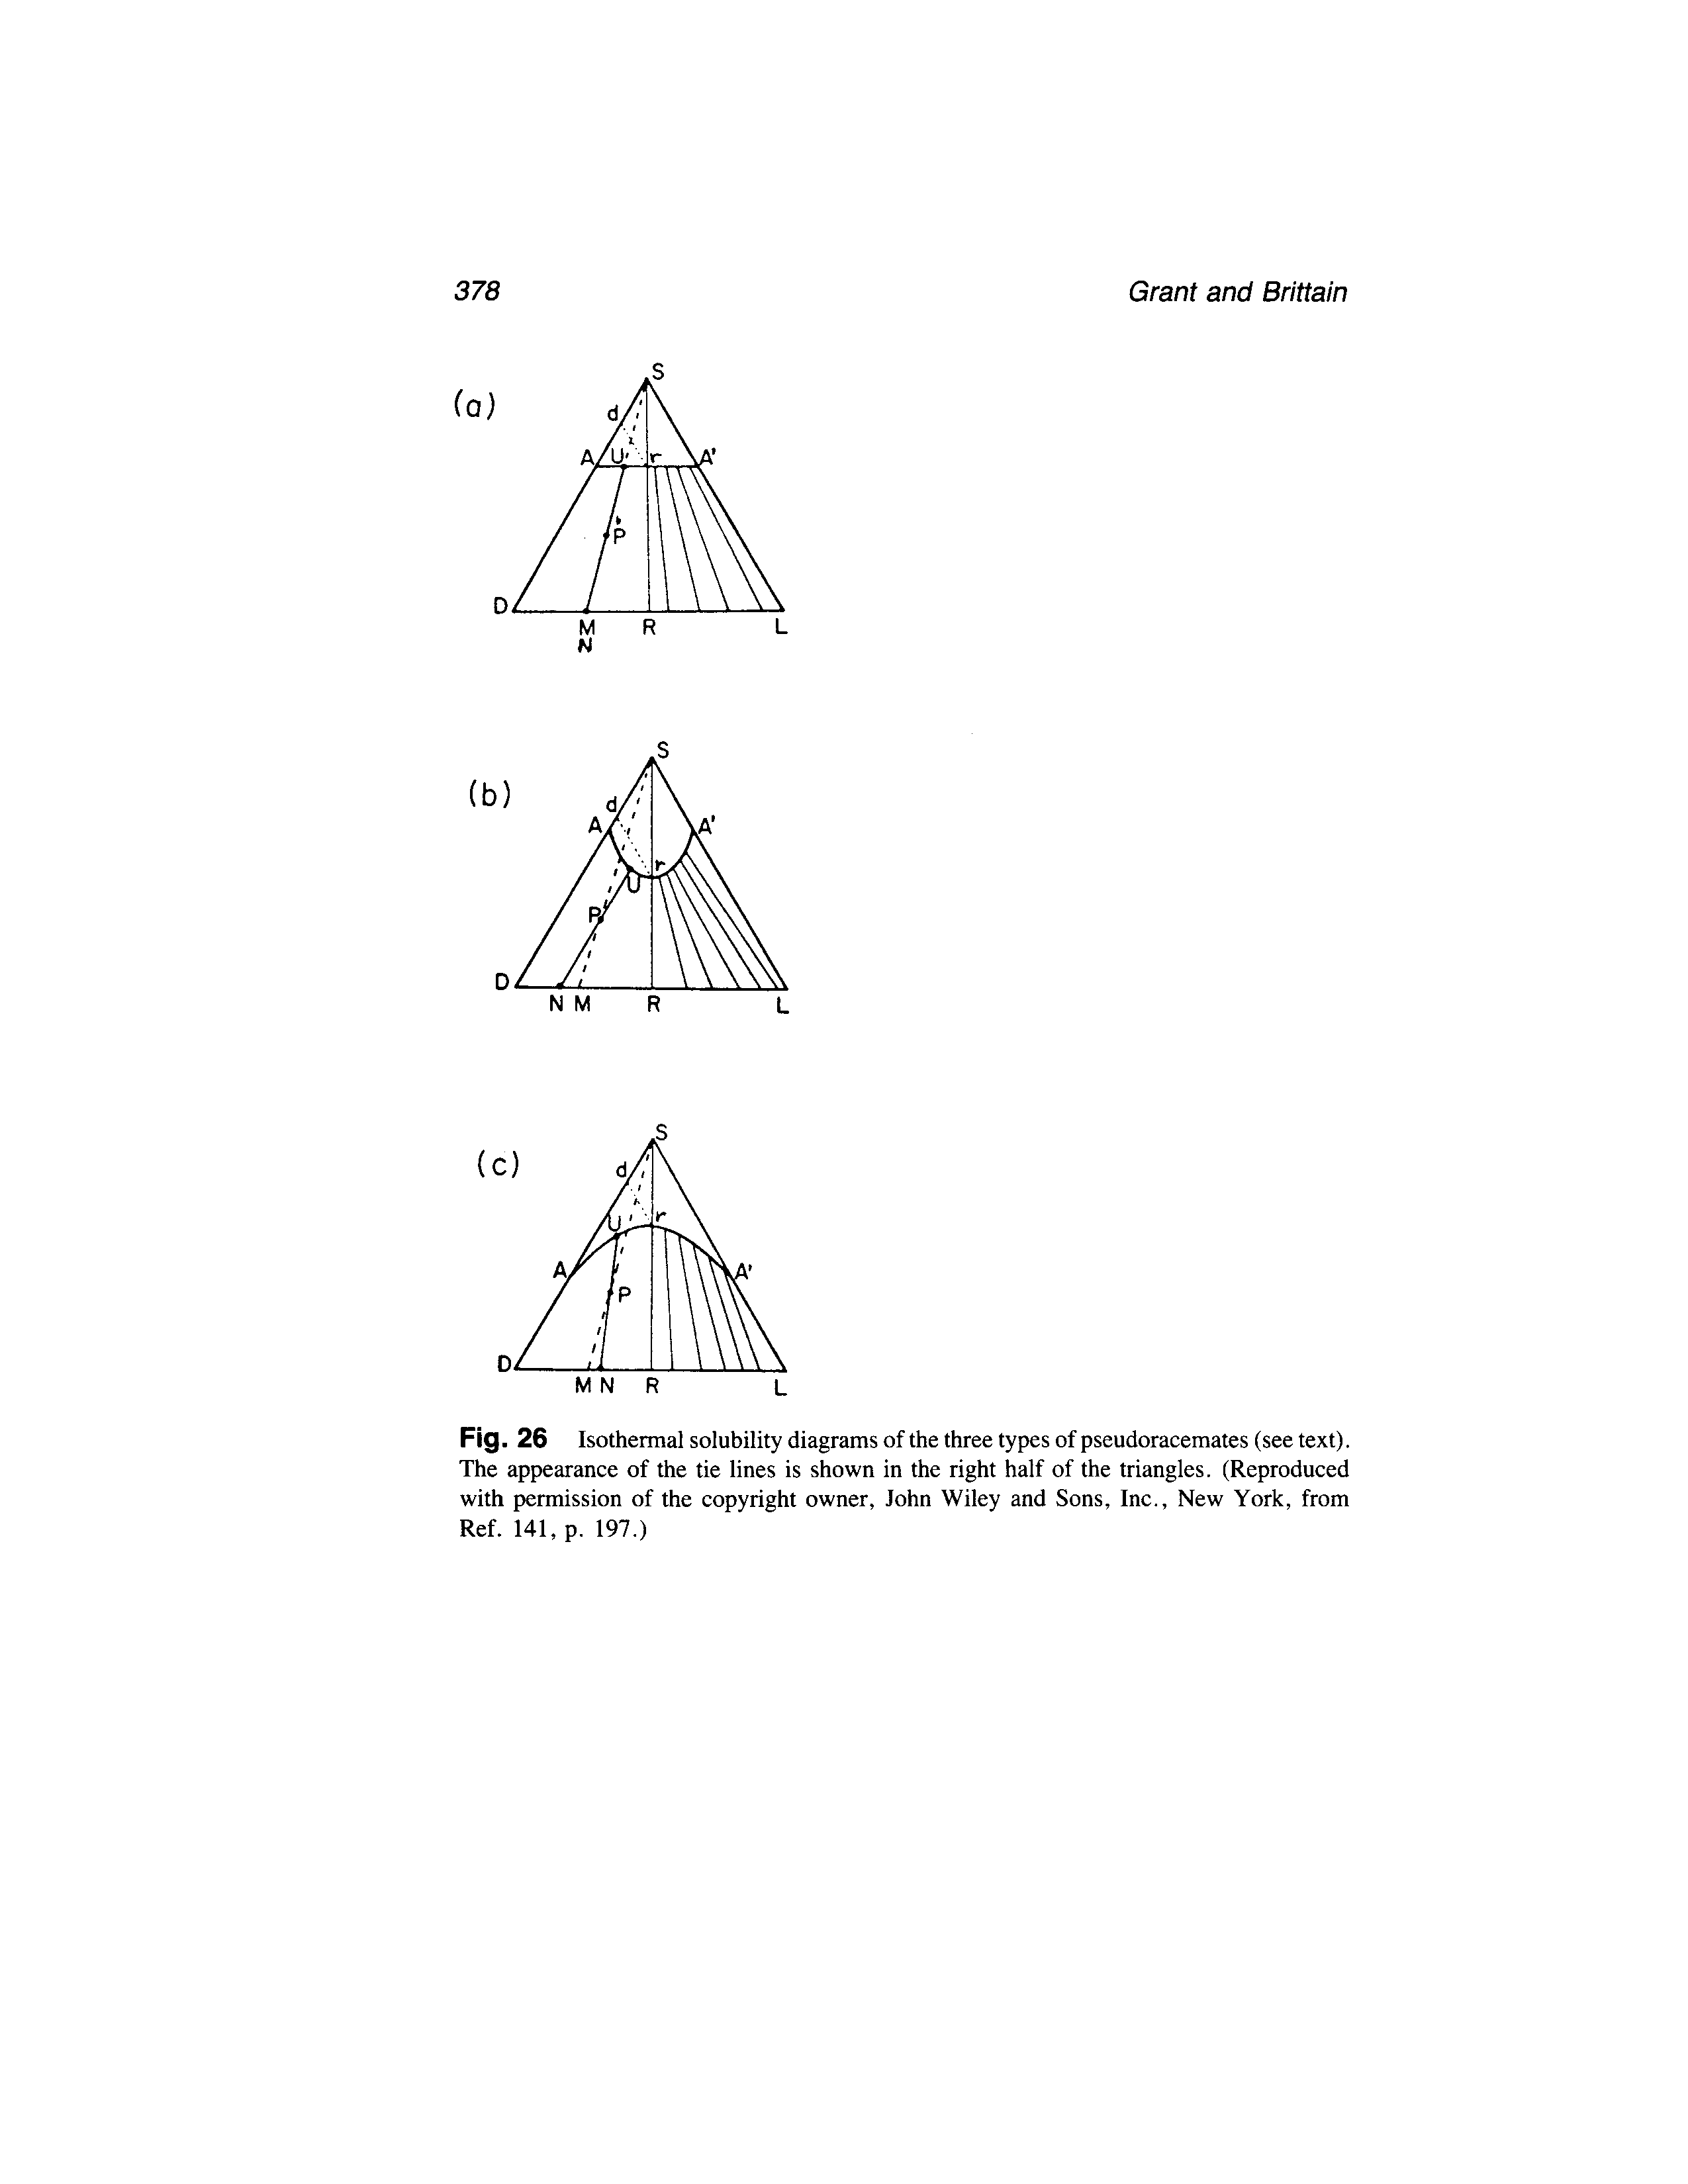 Fig. 26 Isothermal solubility diagrams of the three types of pseudoracemates (see text). The appearance of the tie lines is shown in the right half of the triangles. (Reproduced with permission of the copyright owner, John Wiley and Sons, Inc., New York, from Ref. 141, p. 197.)...